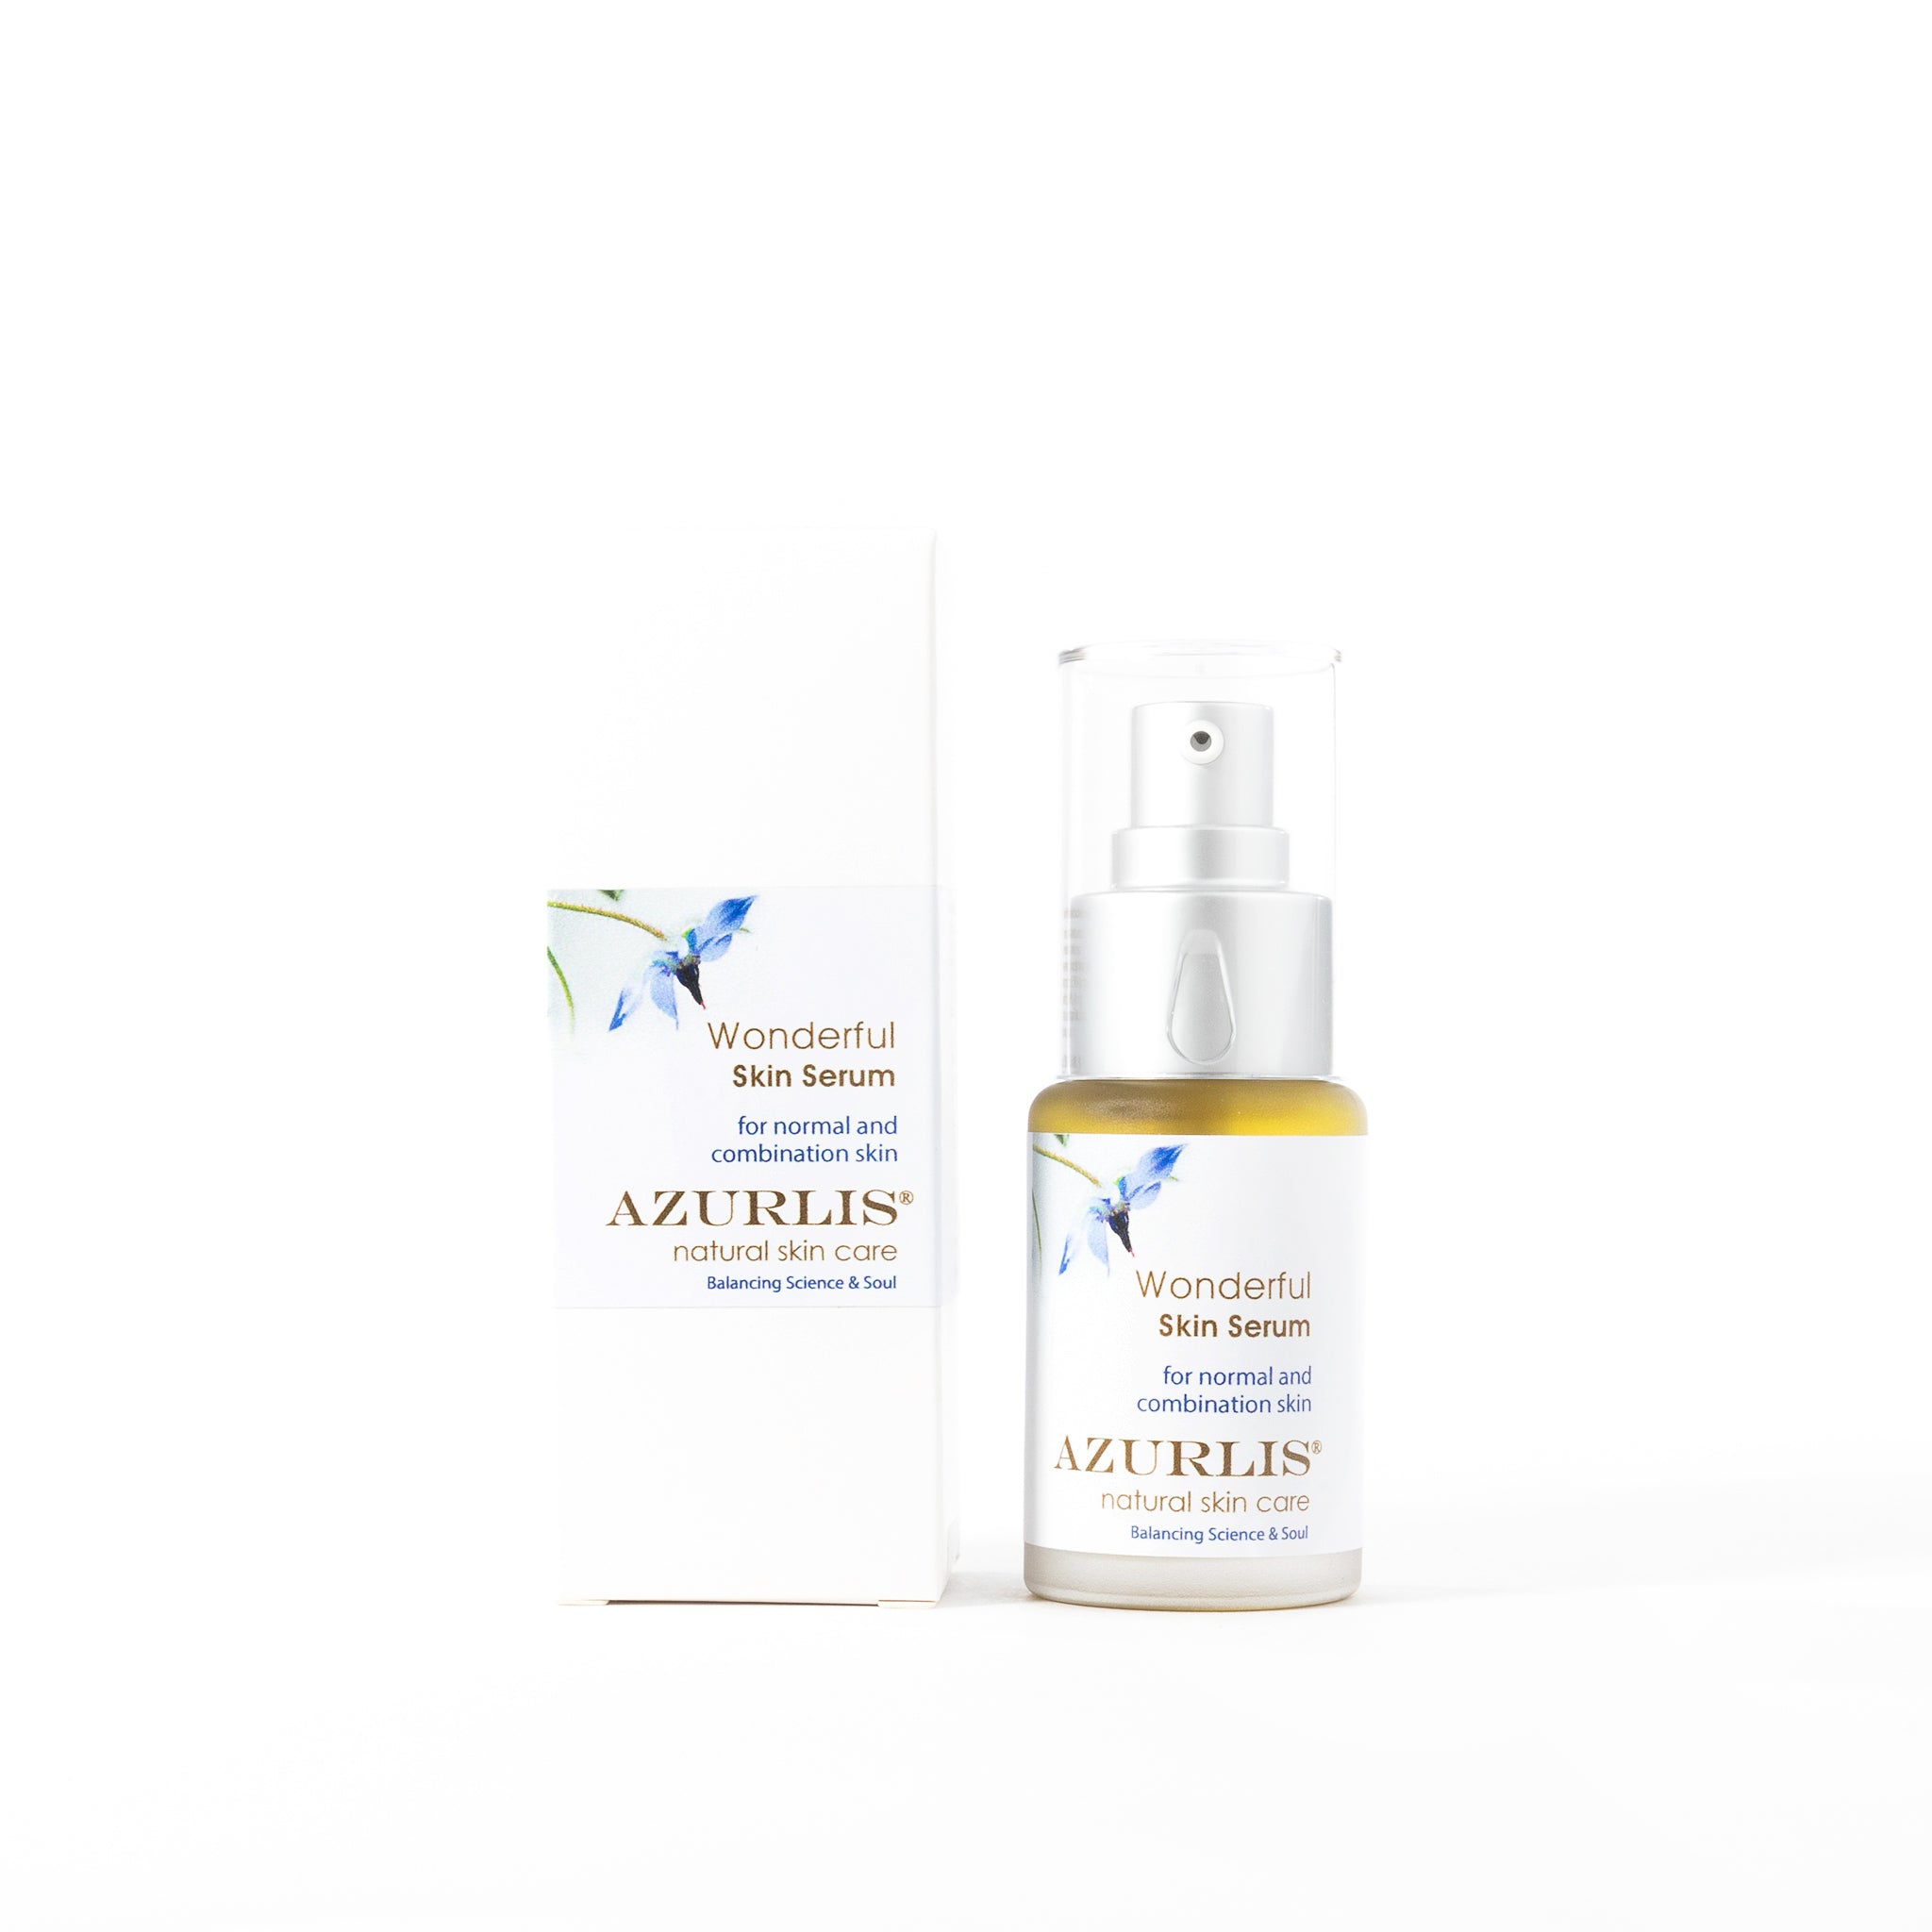 Azurlis™ Wonderful Skin Serum 30ml For normal & combination skin.  A wonderful serum that can be used daily instead of your moisturiser. Feeds and protects the skin, while nurturing the germinal cellular layer.